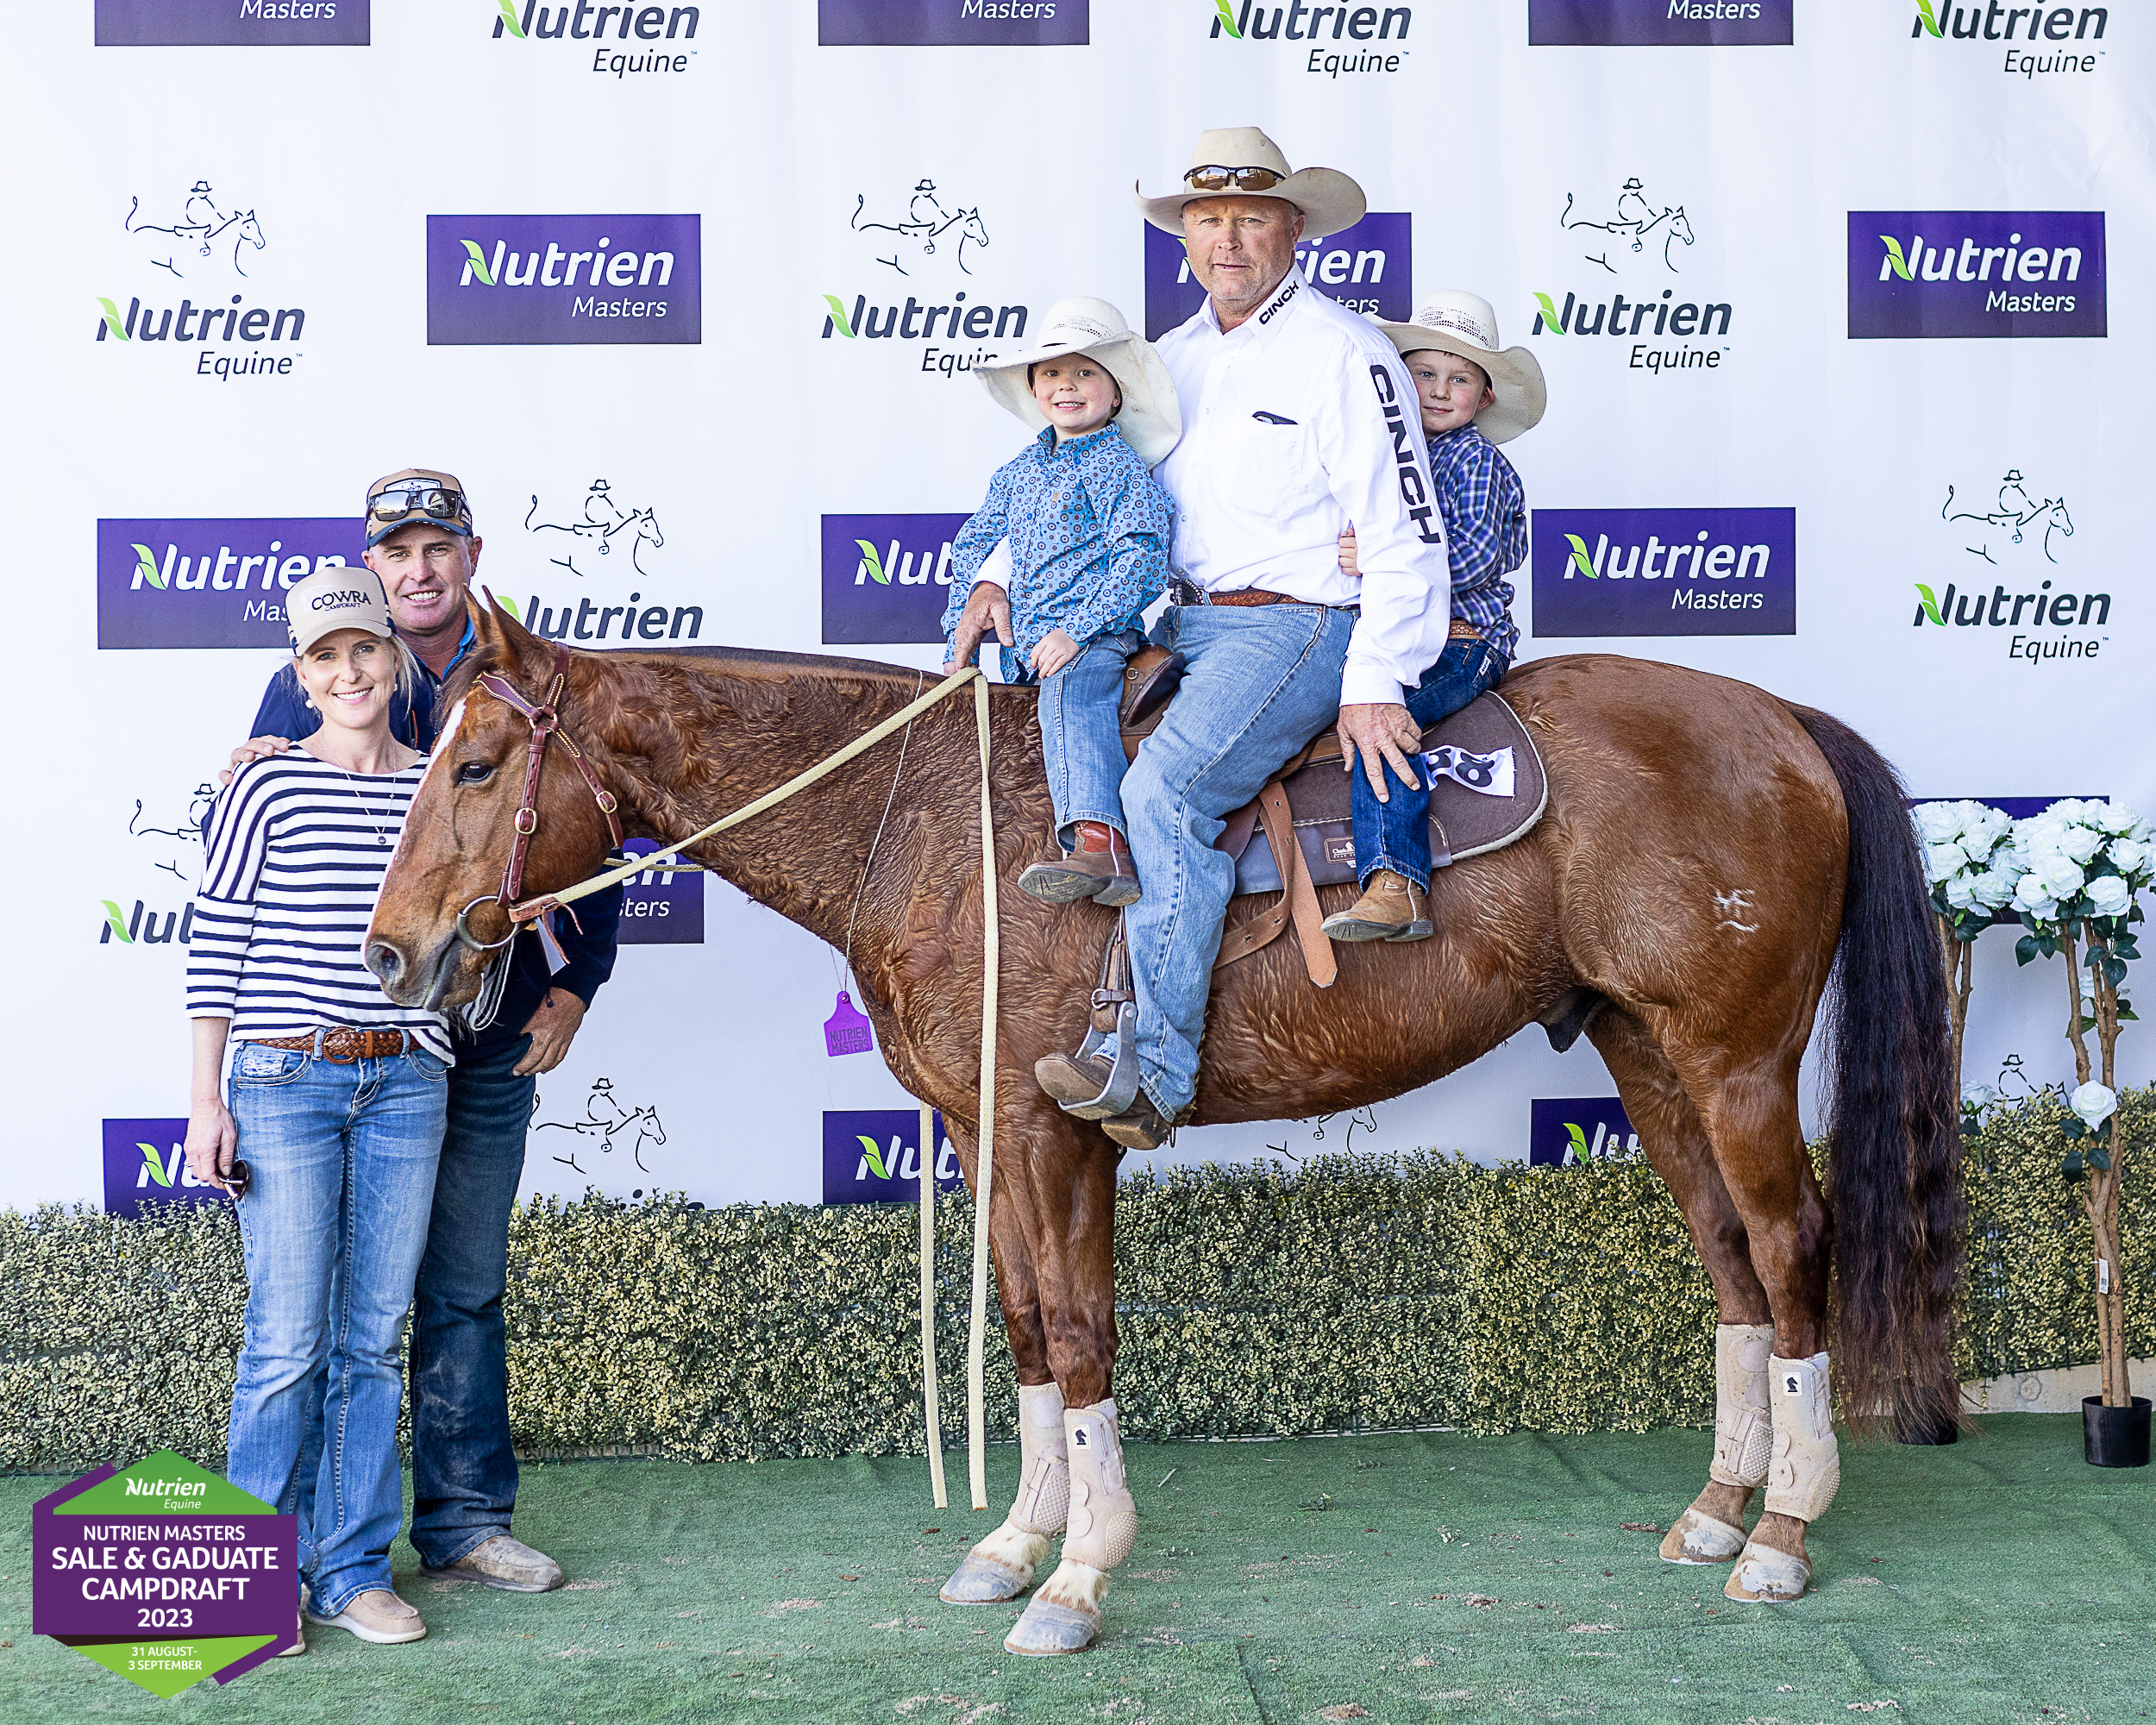 First Day of the 2023 Nutrien Masters Sale has geldings leading the way. 